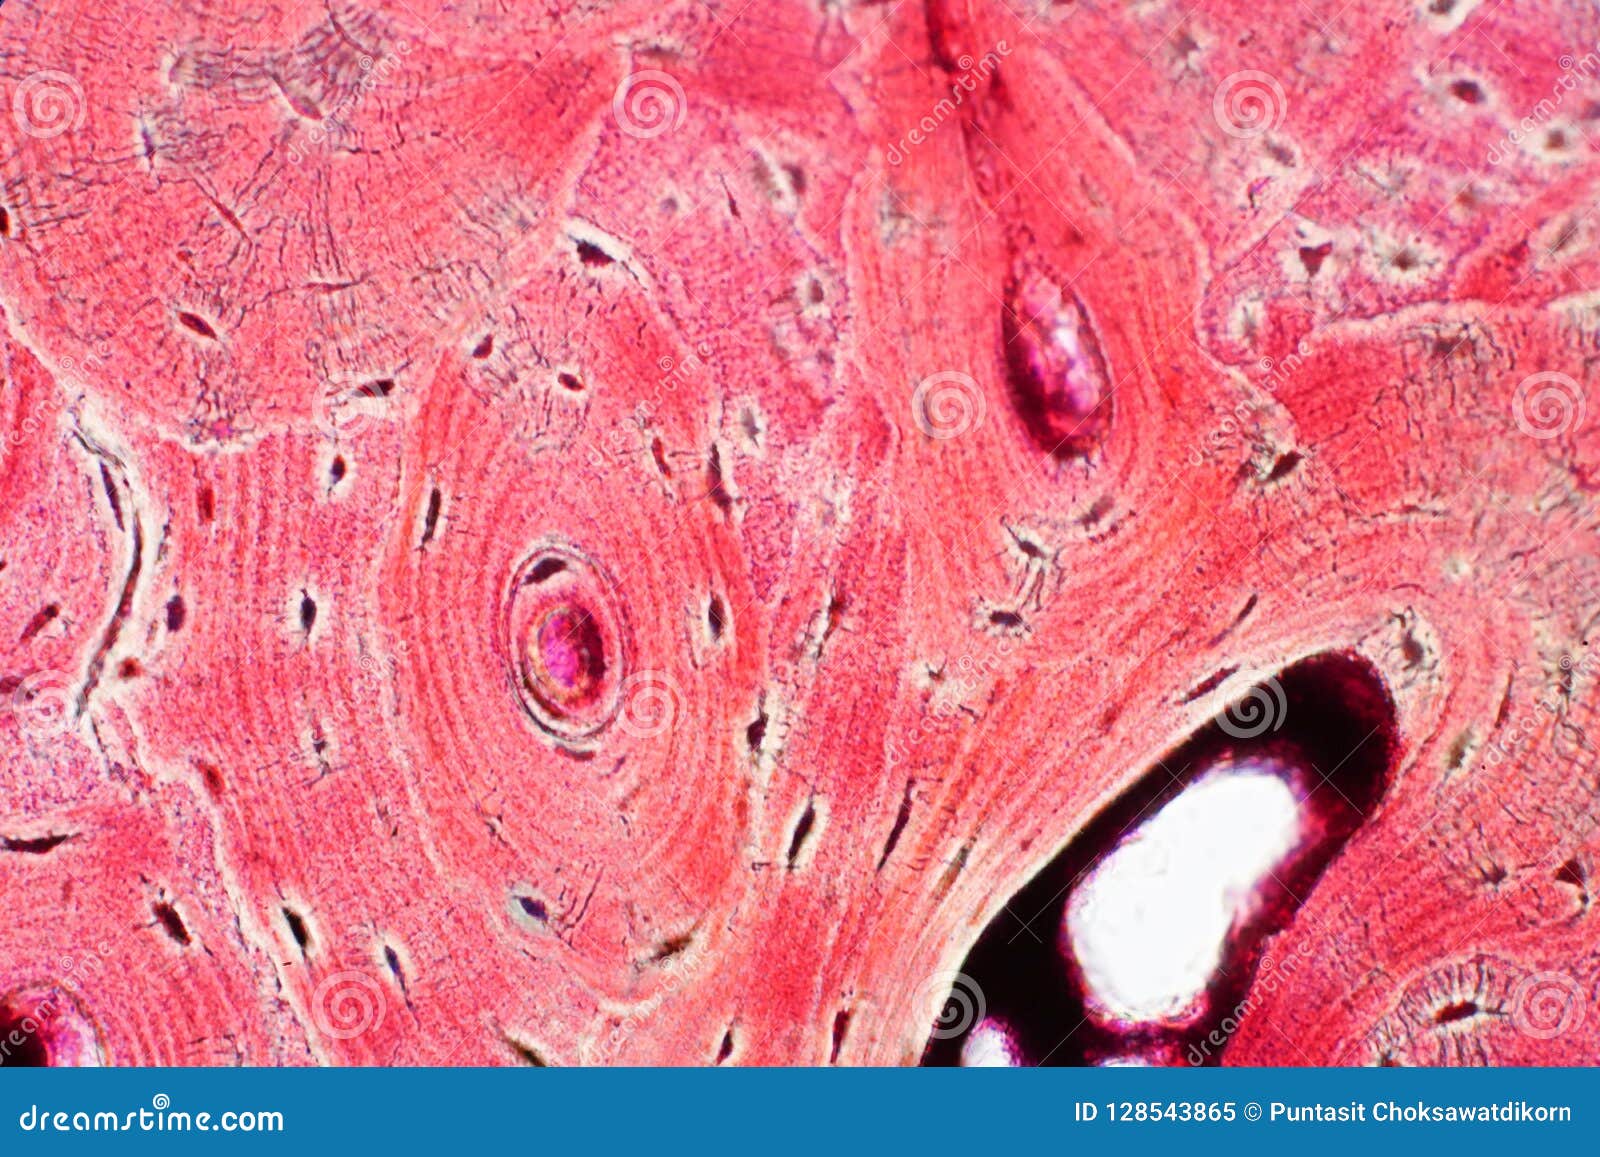 histology of human compact bone tissue under microscope view for